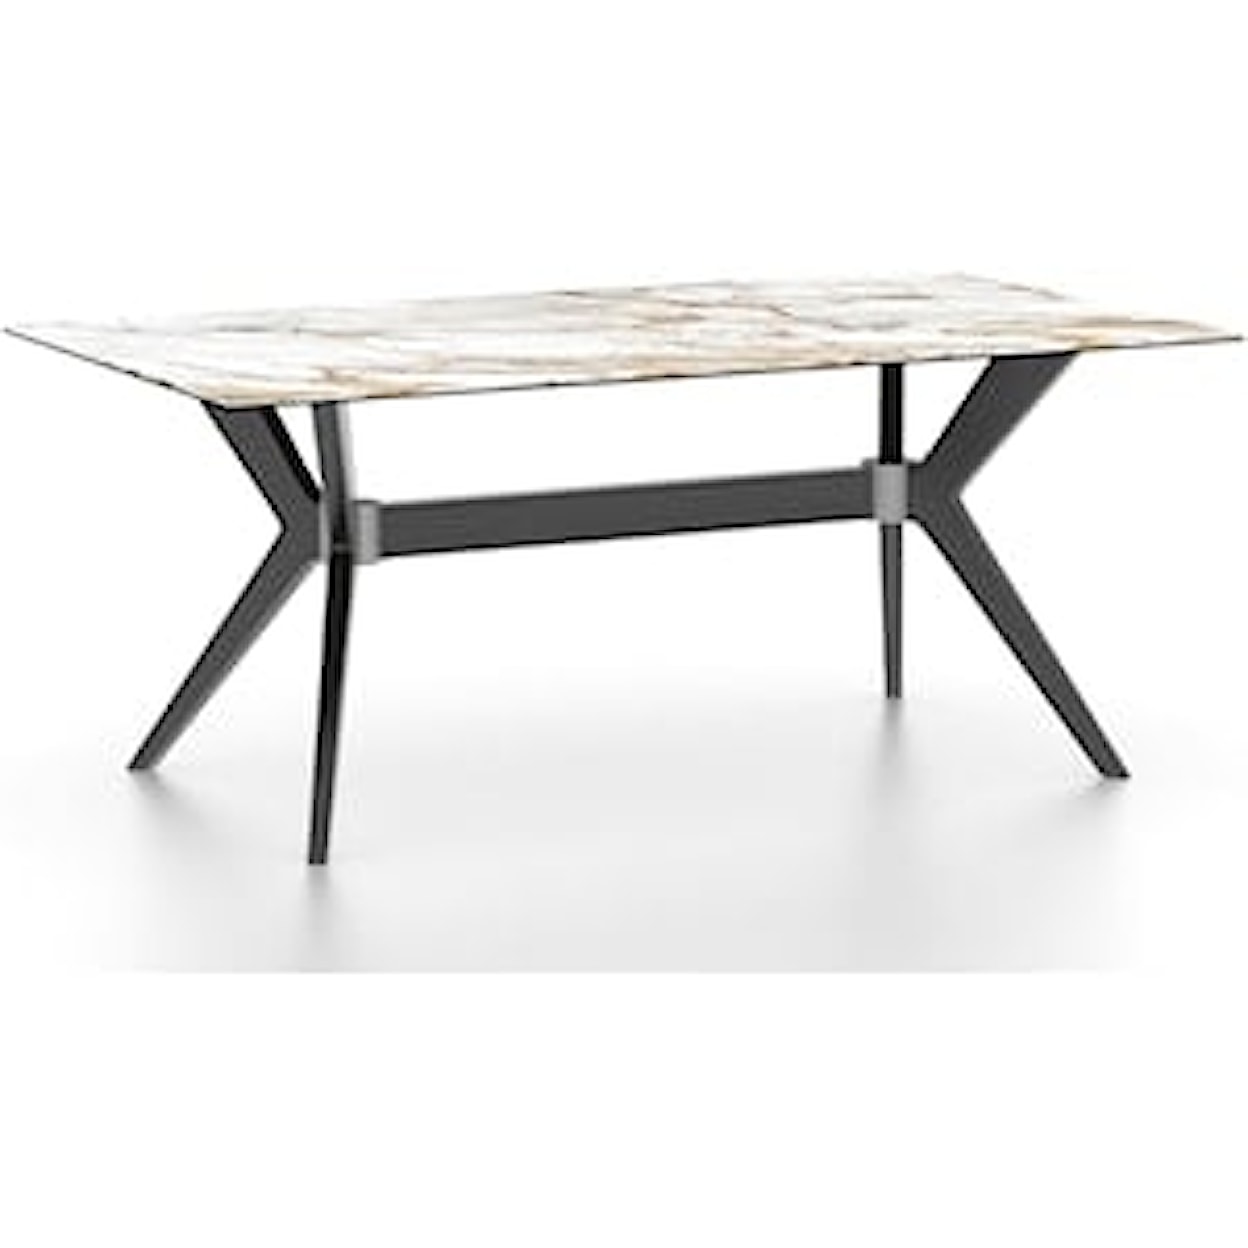 Canadel Downtown Rectangular porcelain table